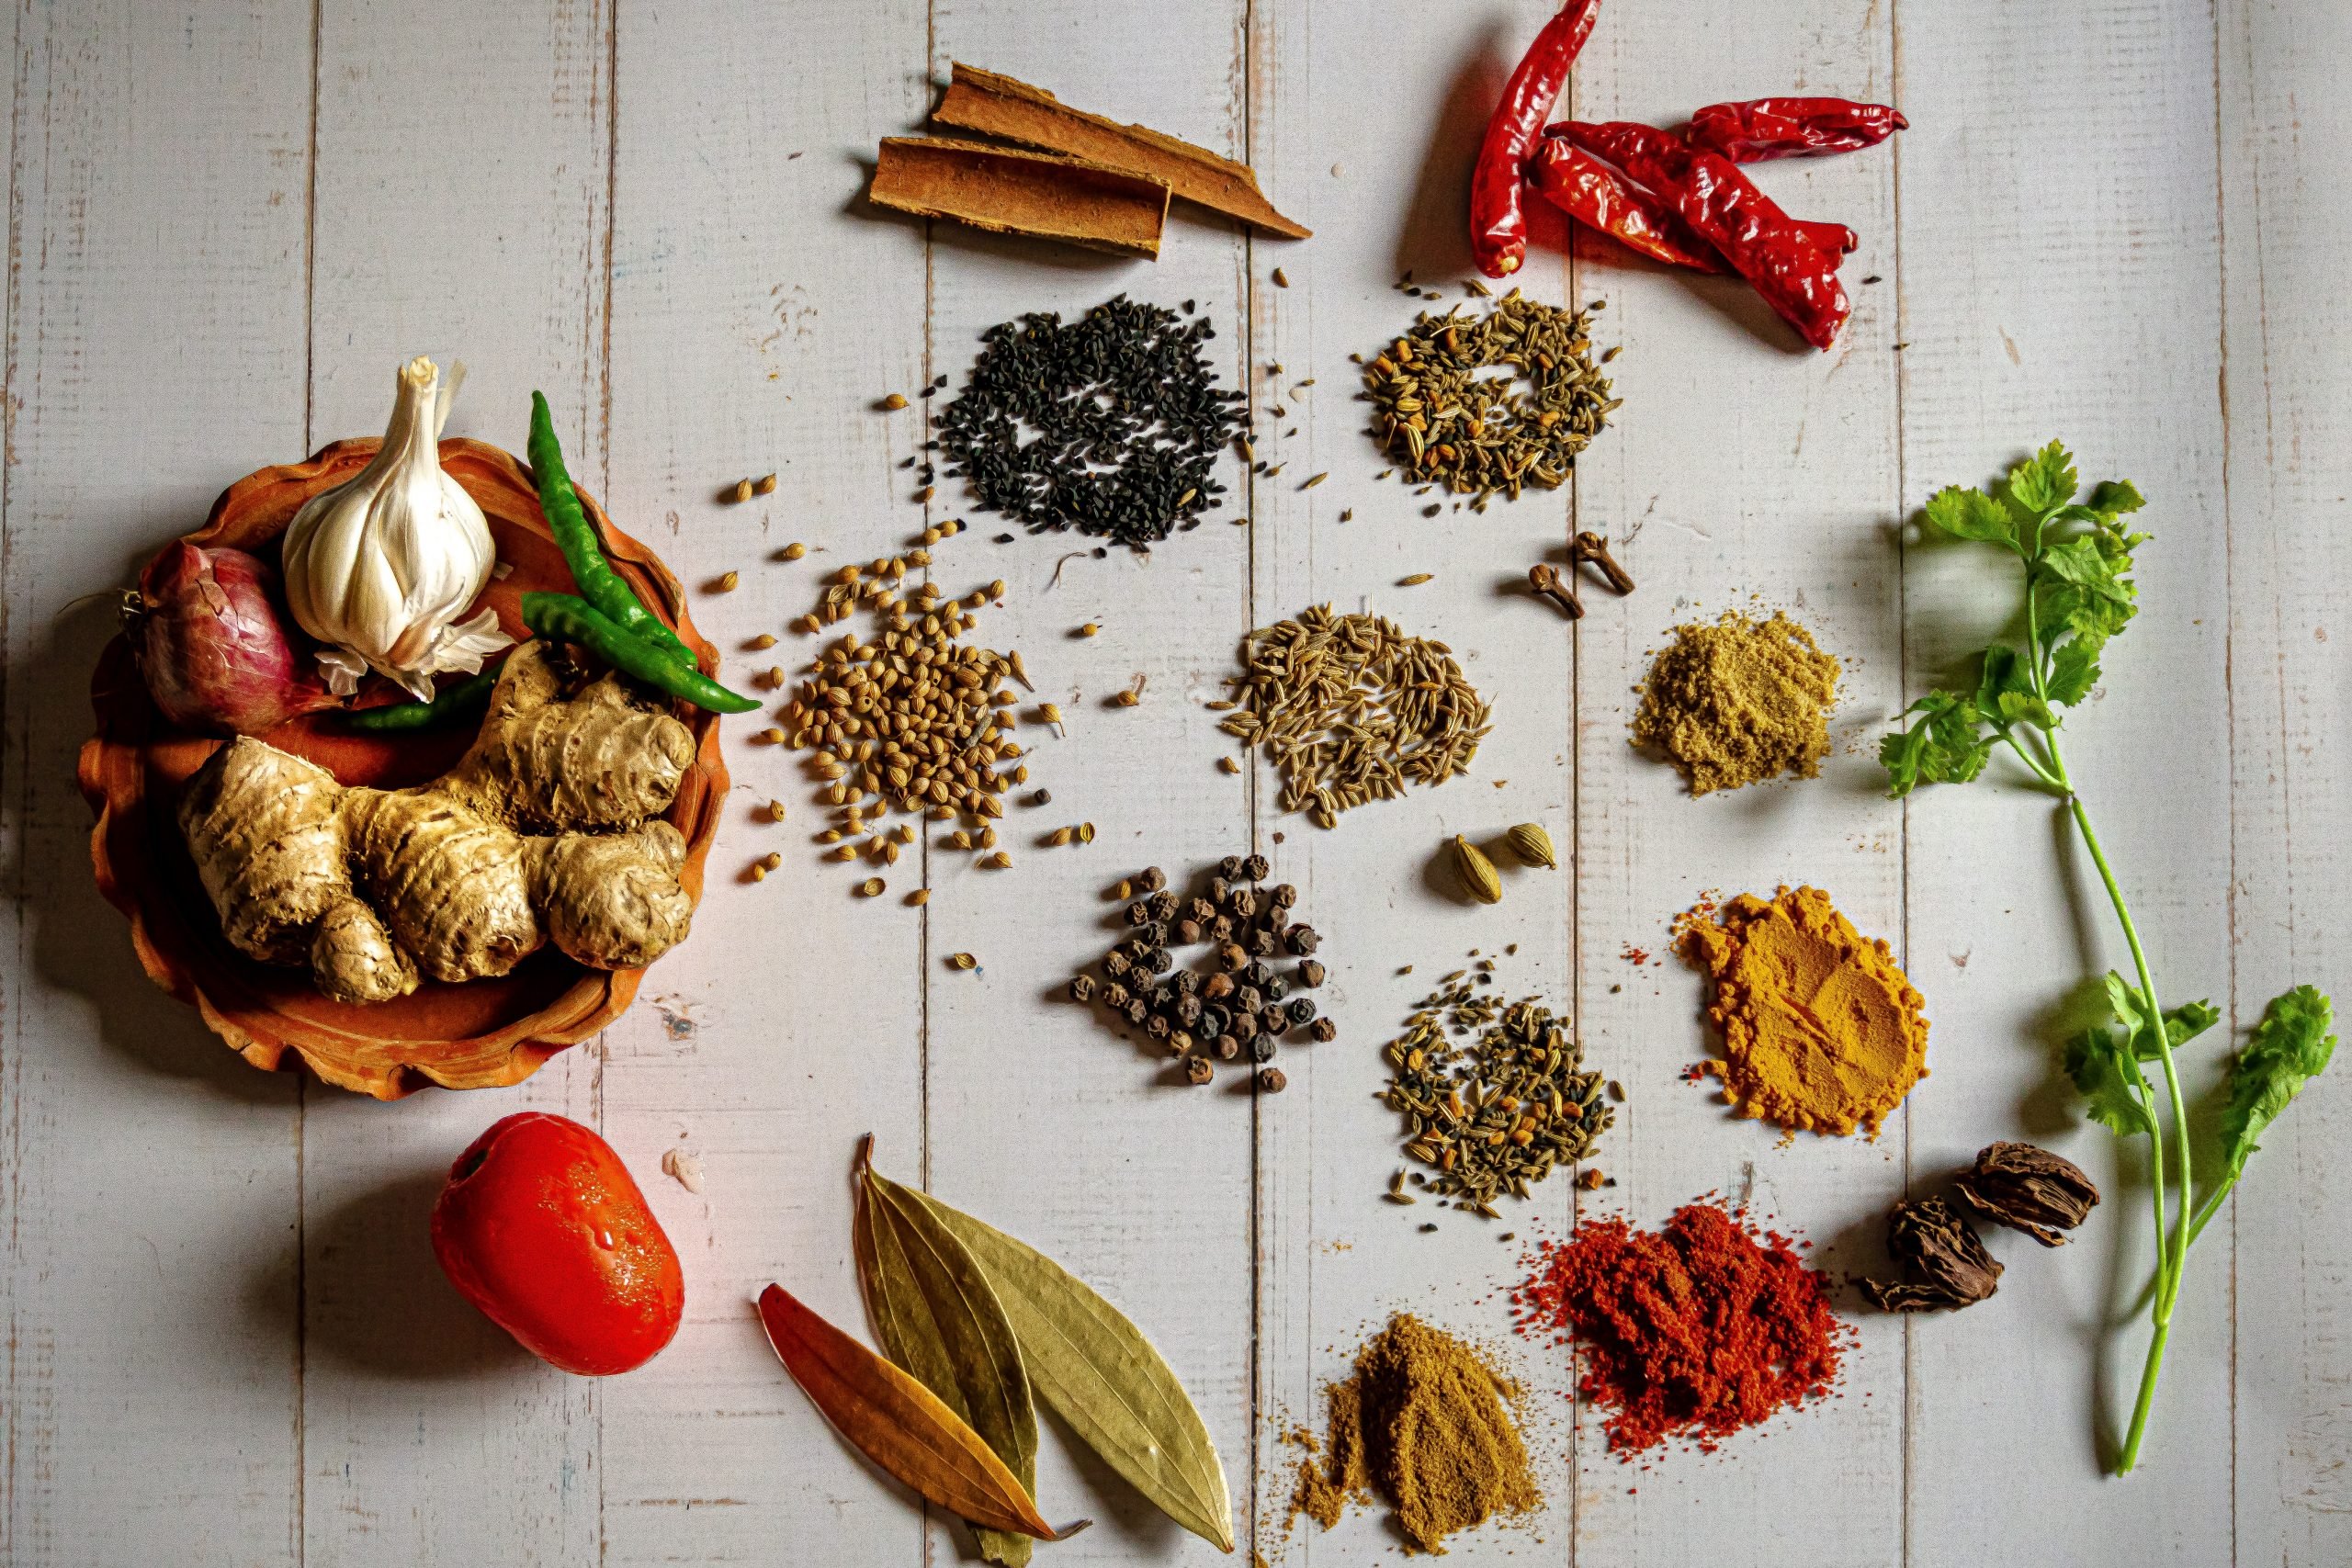 You are currently viewing The Perfect Marinade: A blog about using spices to make the perfect marinades for any meal.